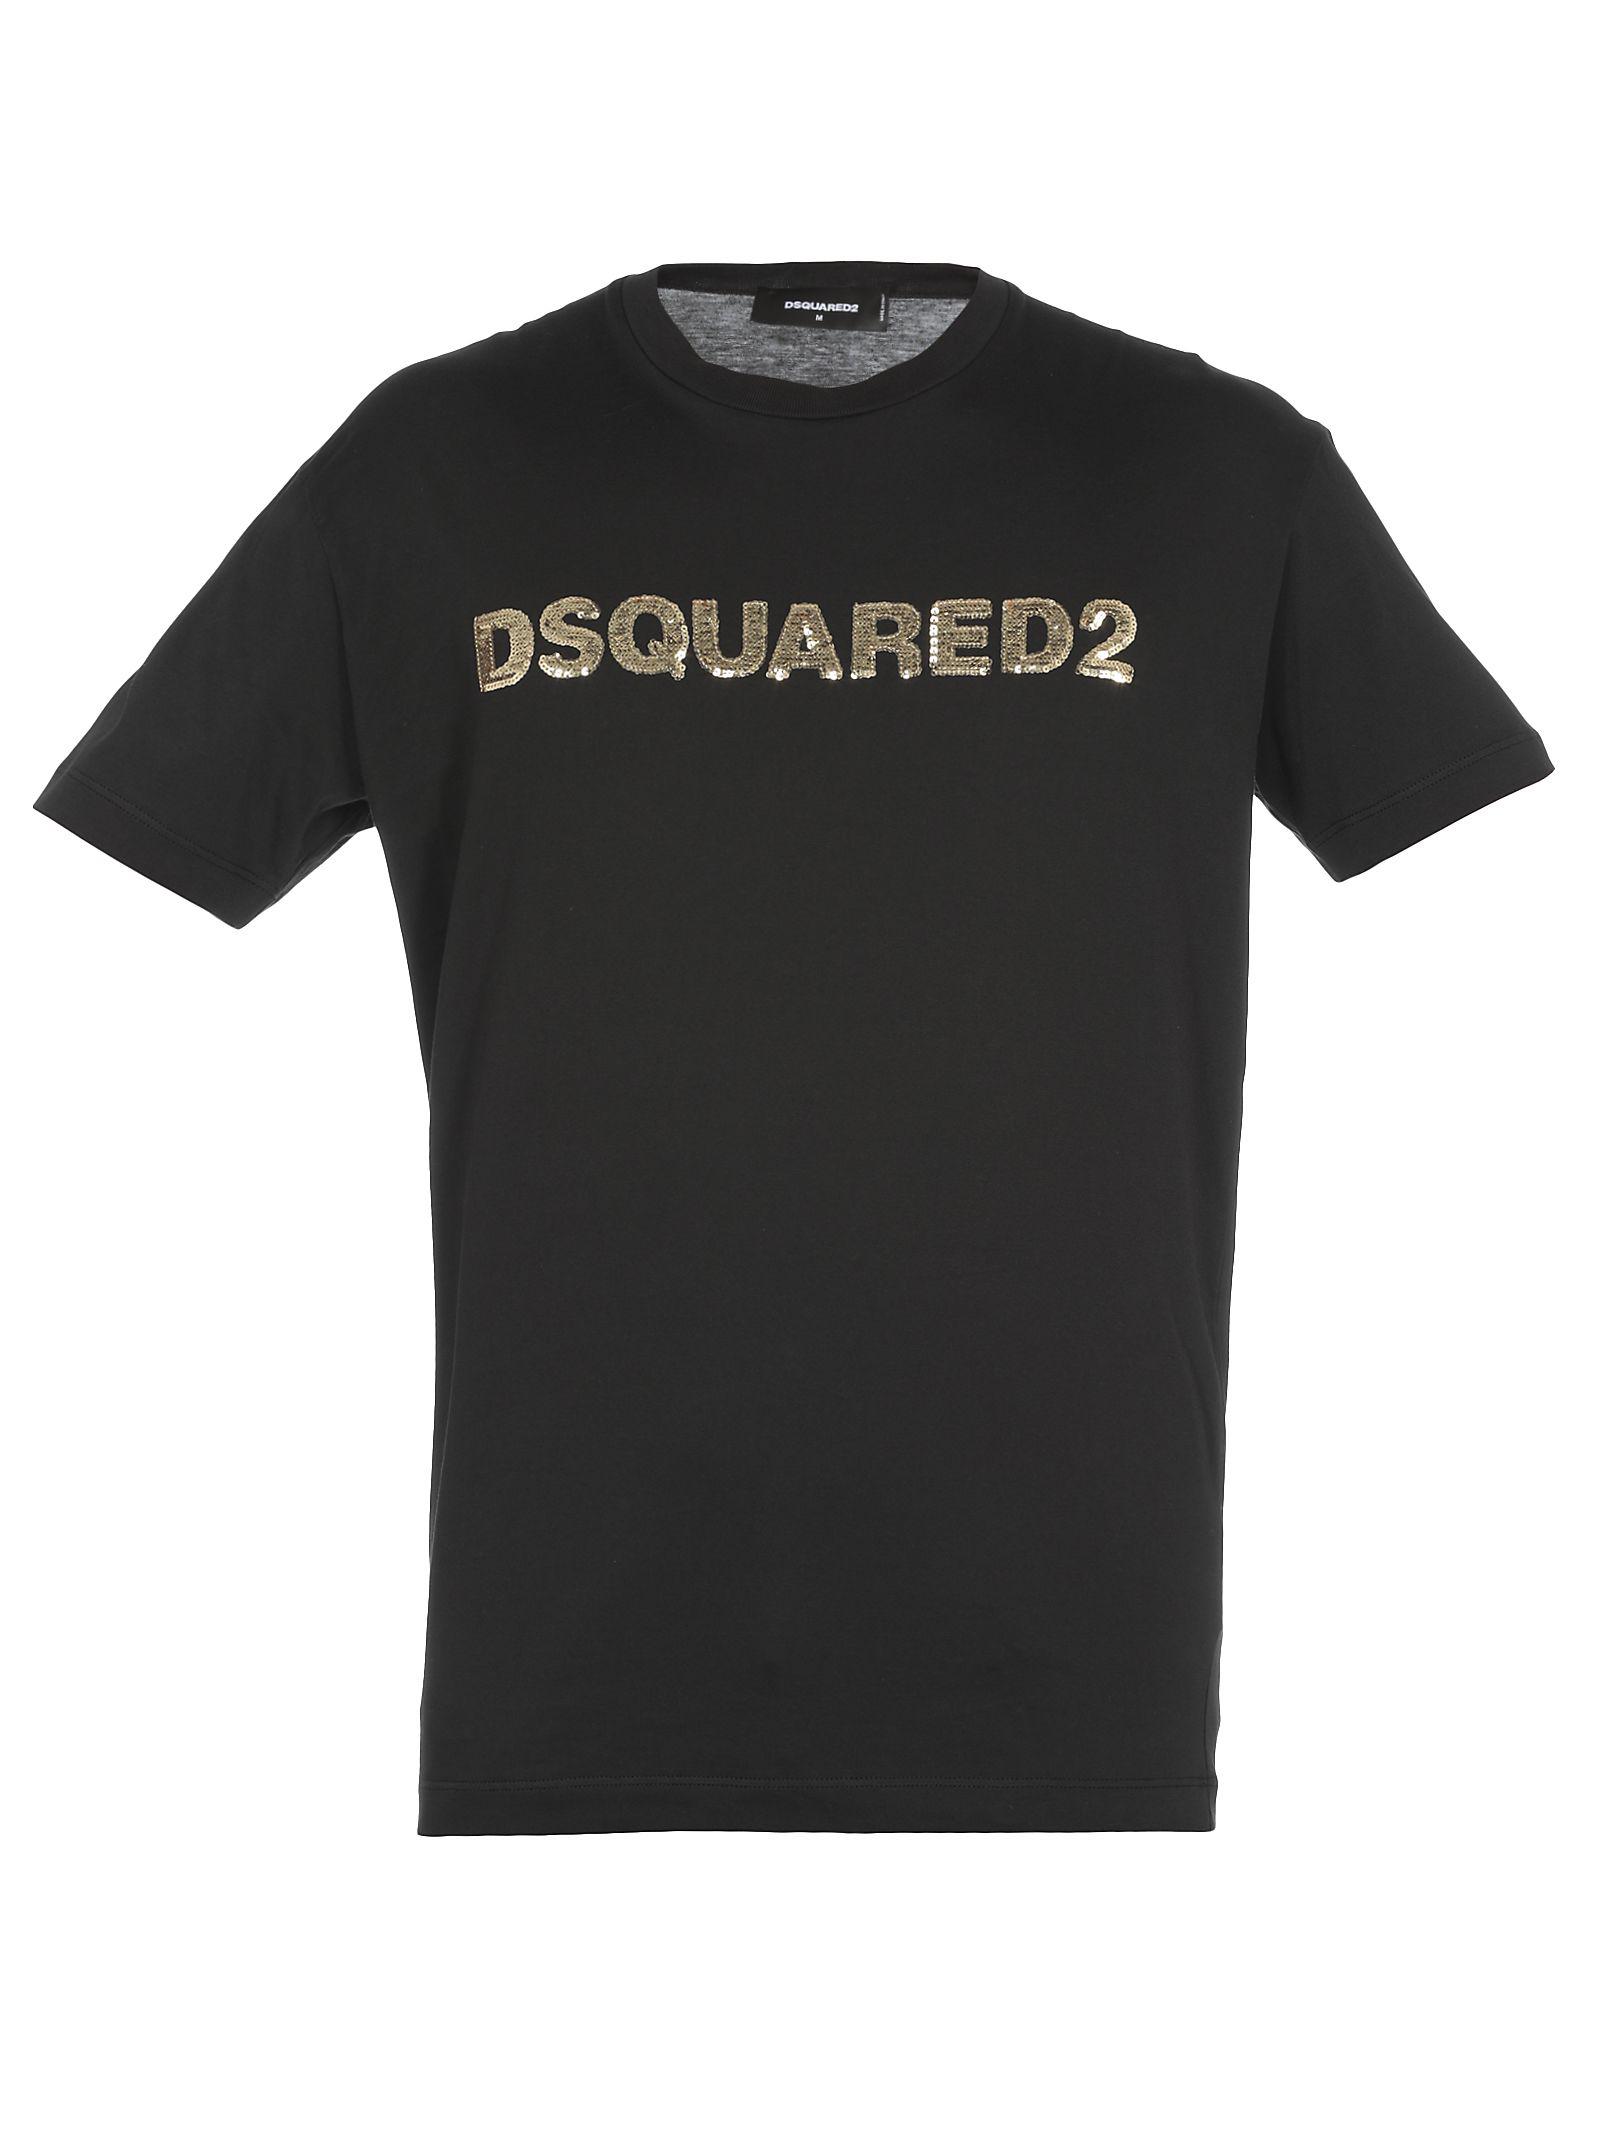 black and gold dsquared t shirt